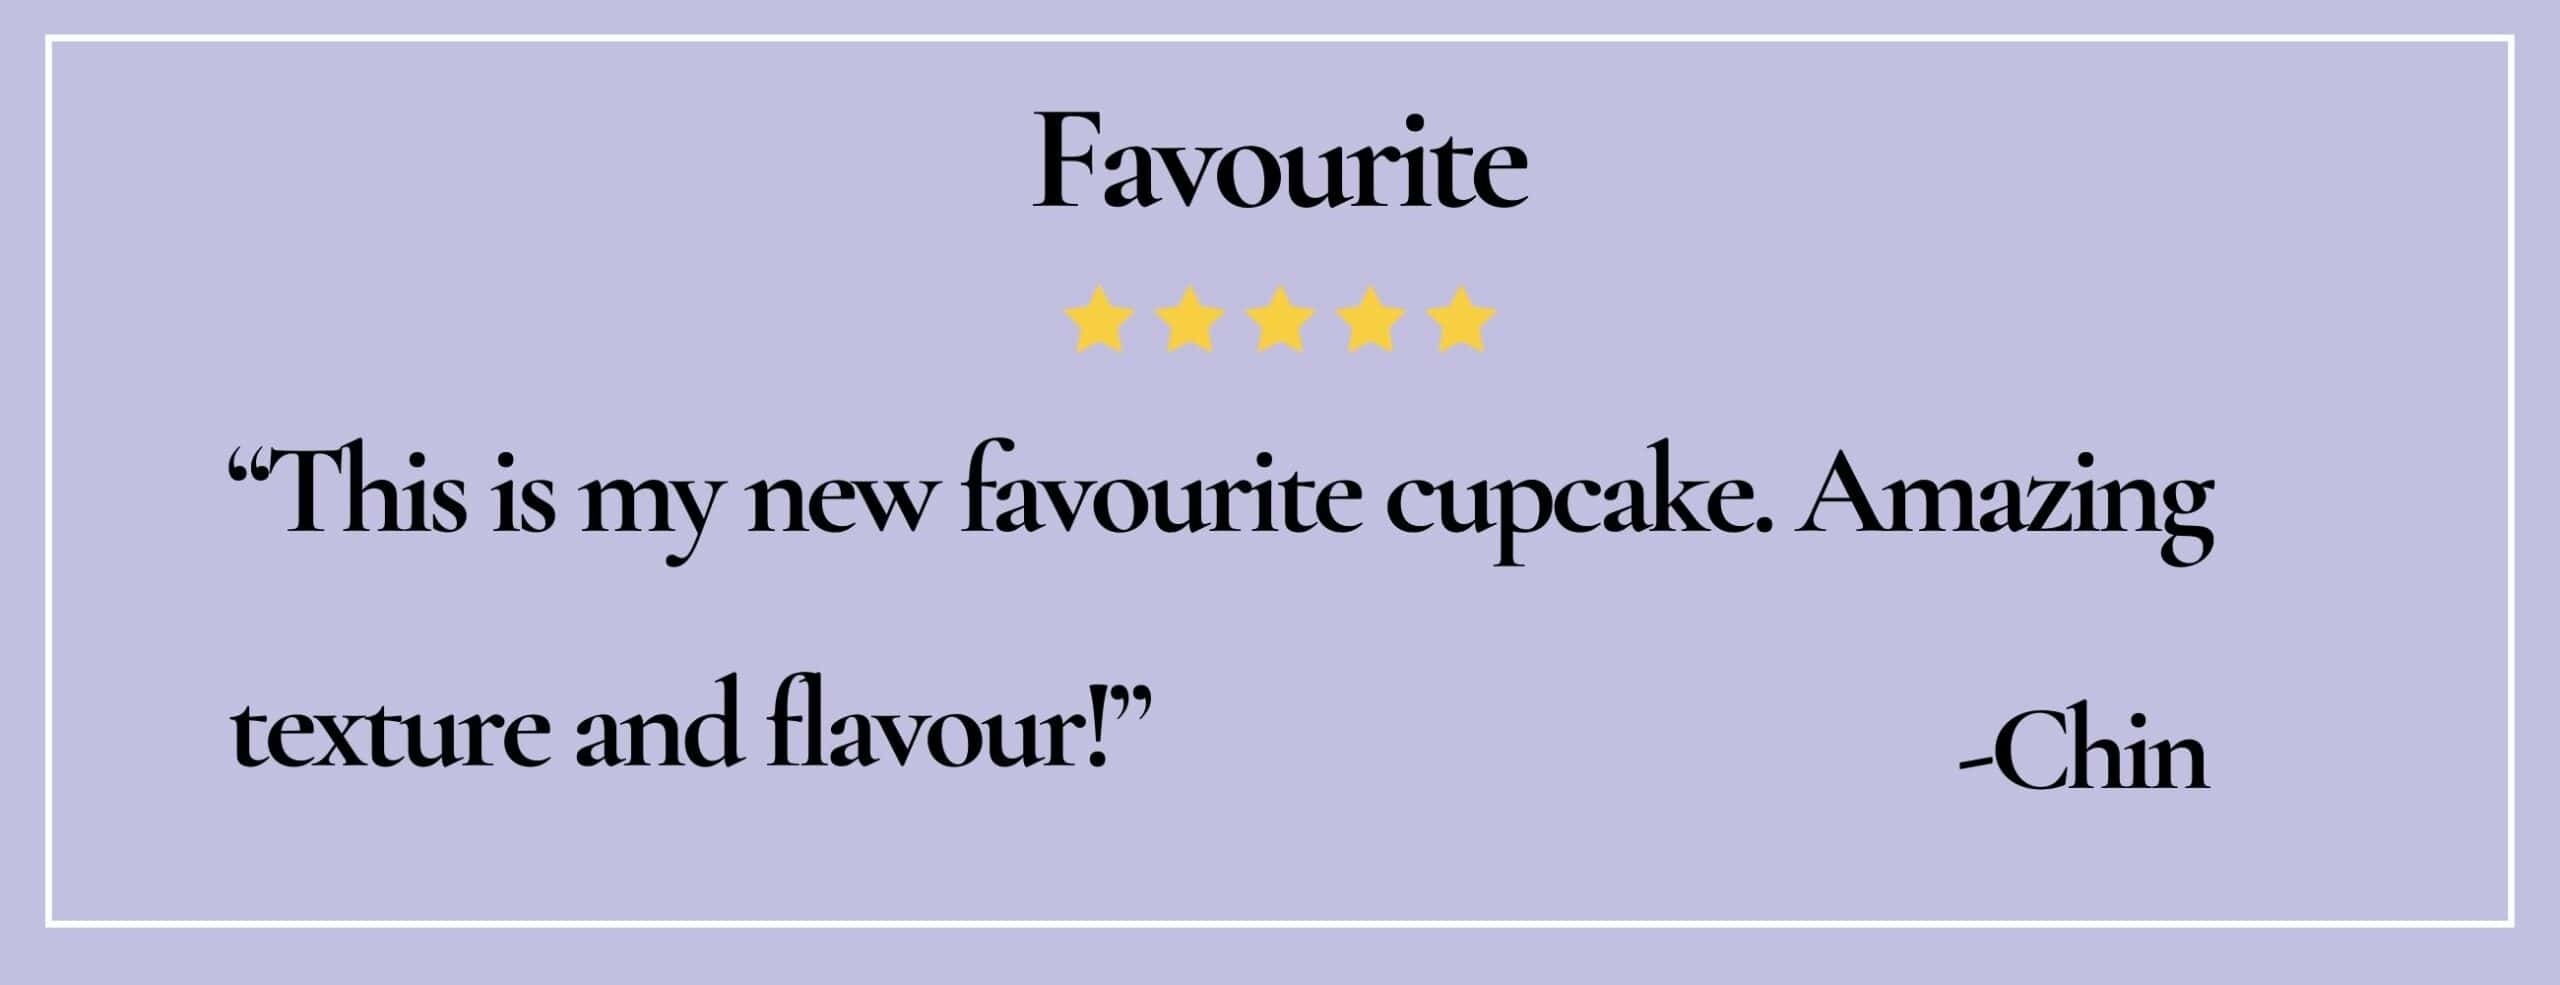 text box with quote: Favourite "This is my new favourite cupcake. Amazing texture and flavour!"-Chin